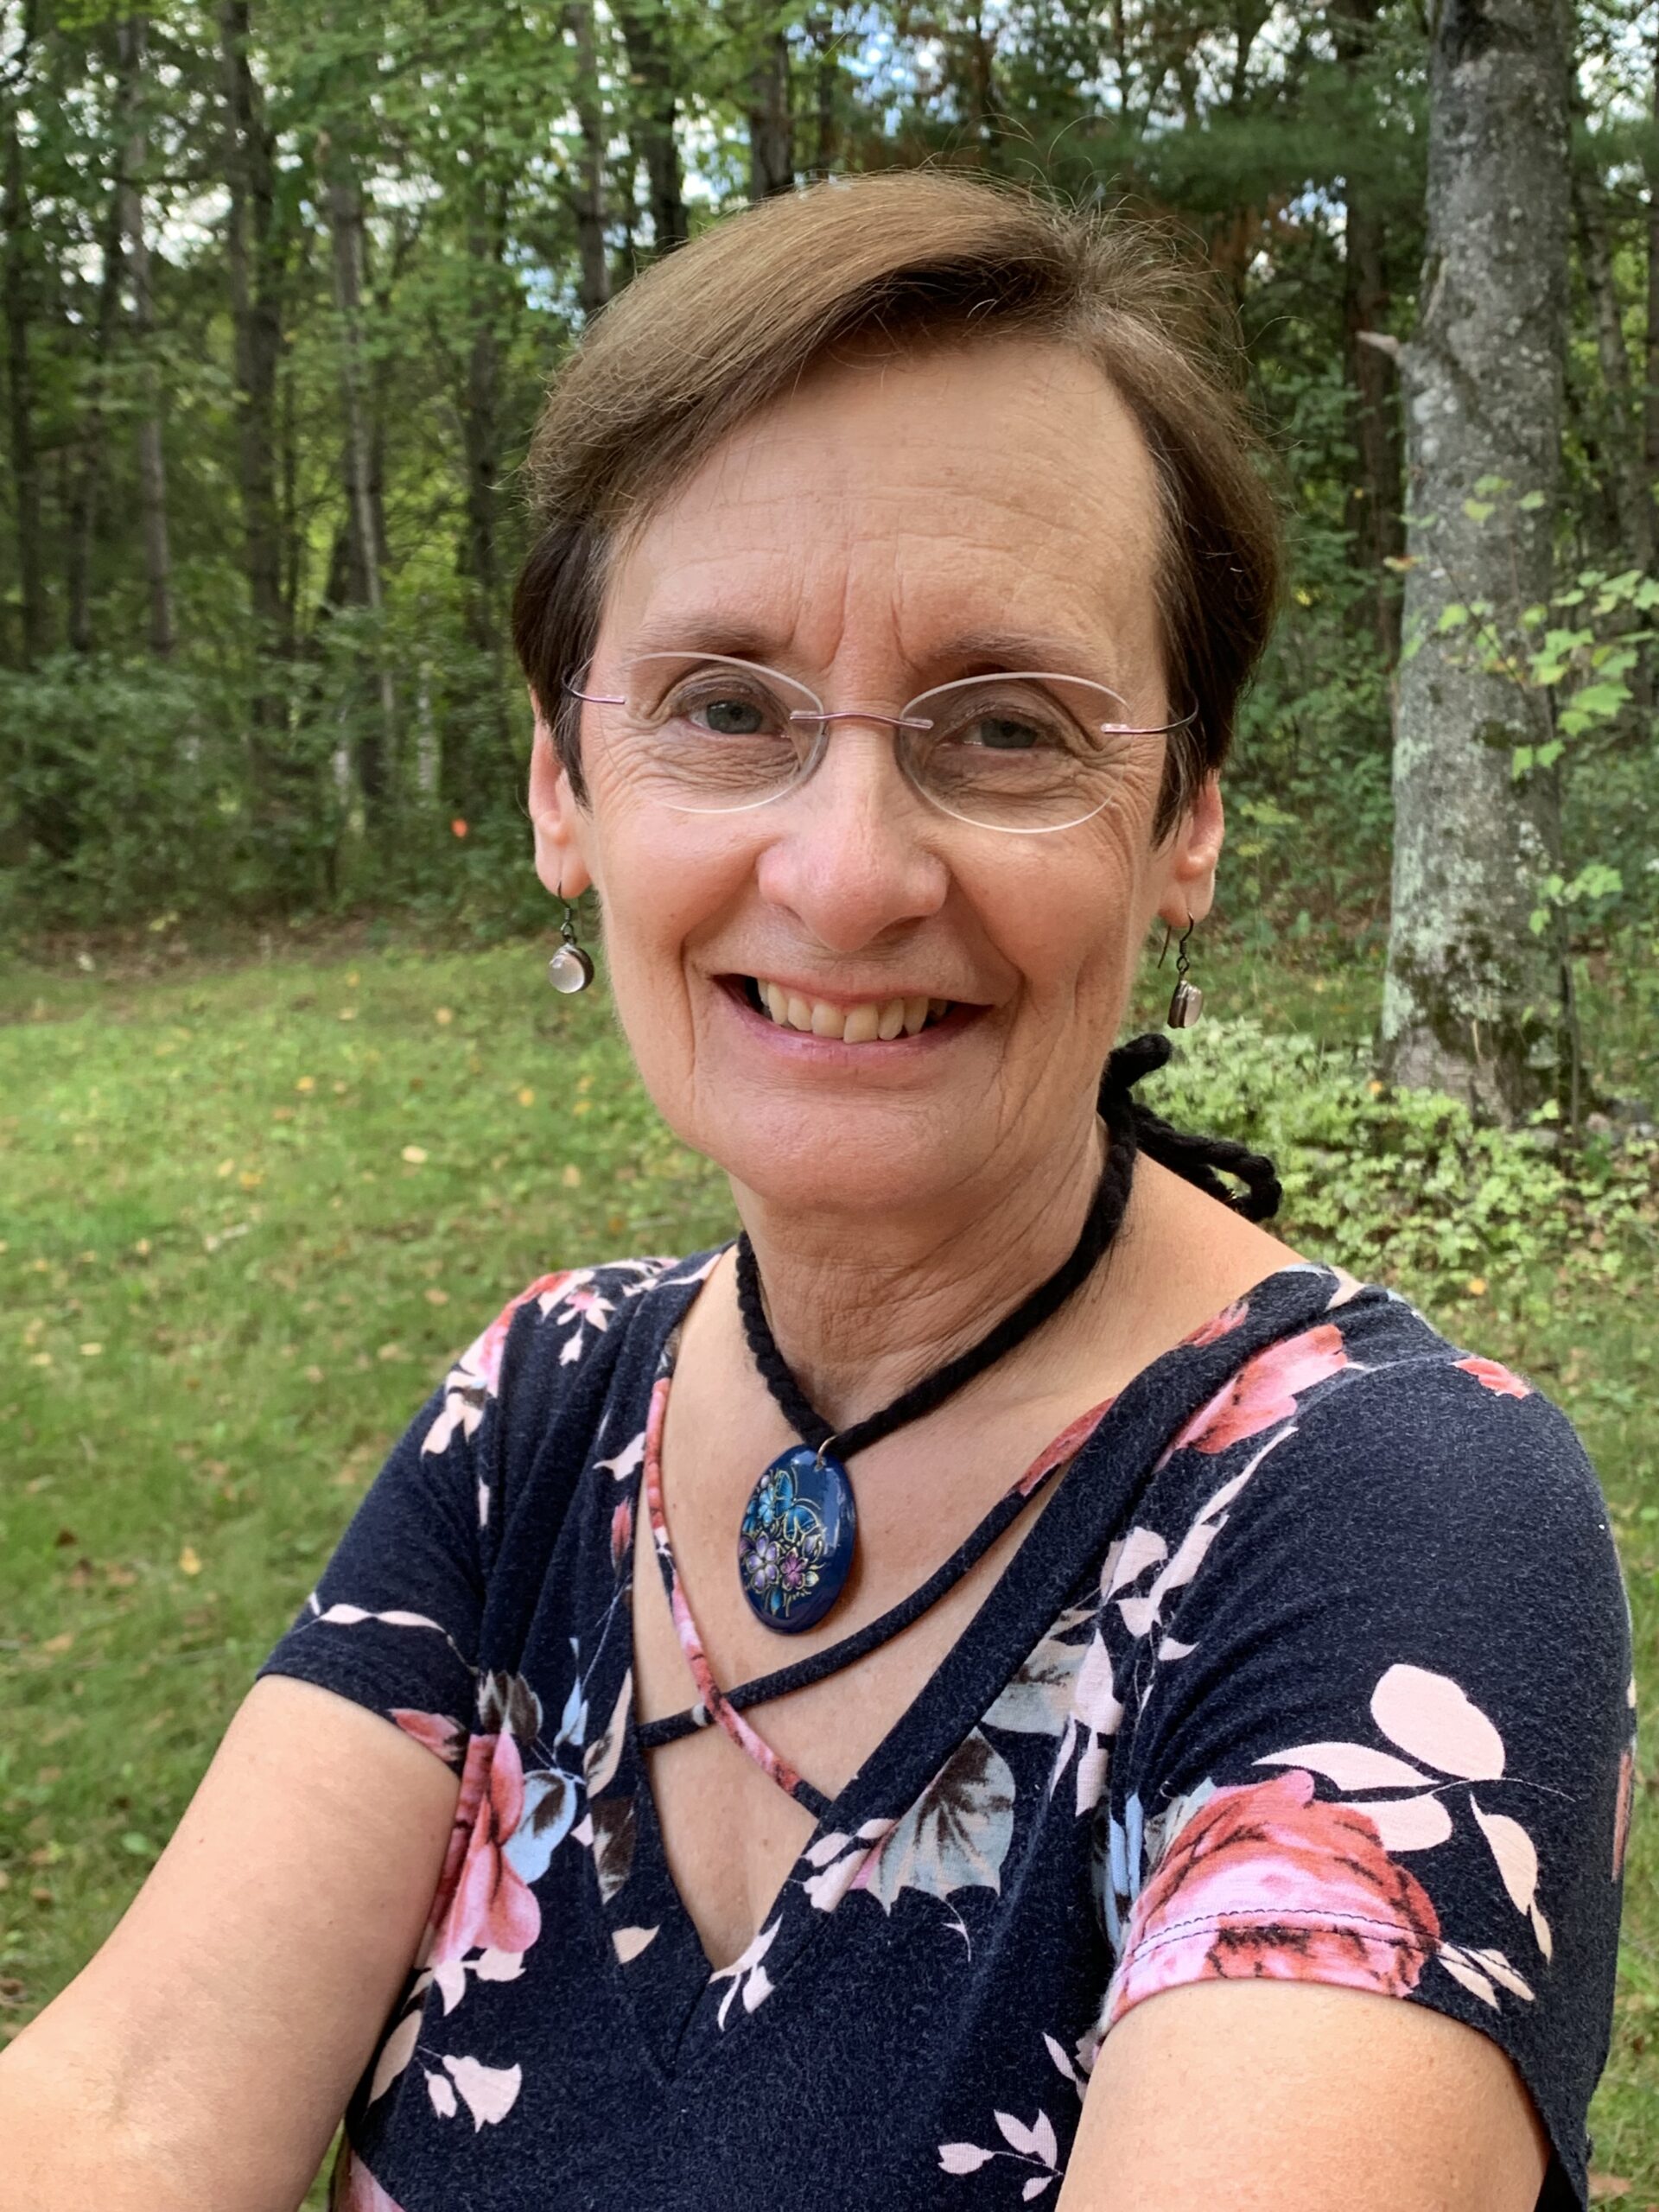 Author at her northwoods home